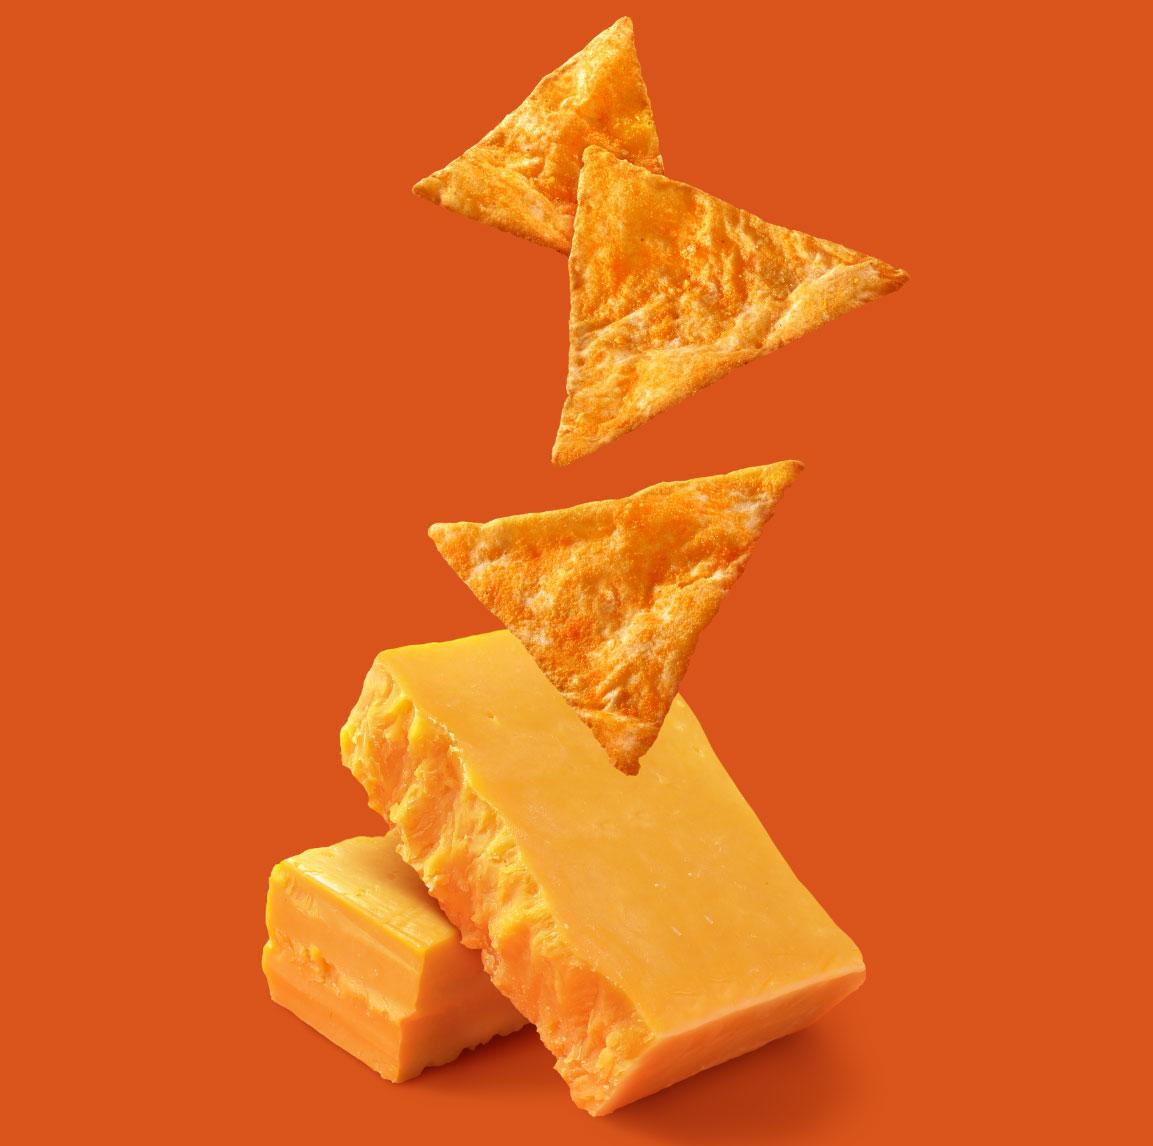 mike wepplo photoreal photography cheese cubes and chips